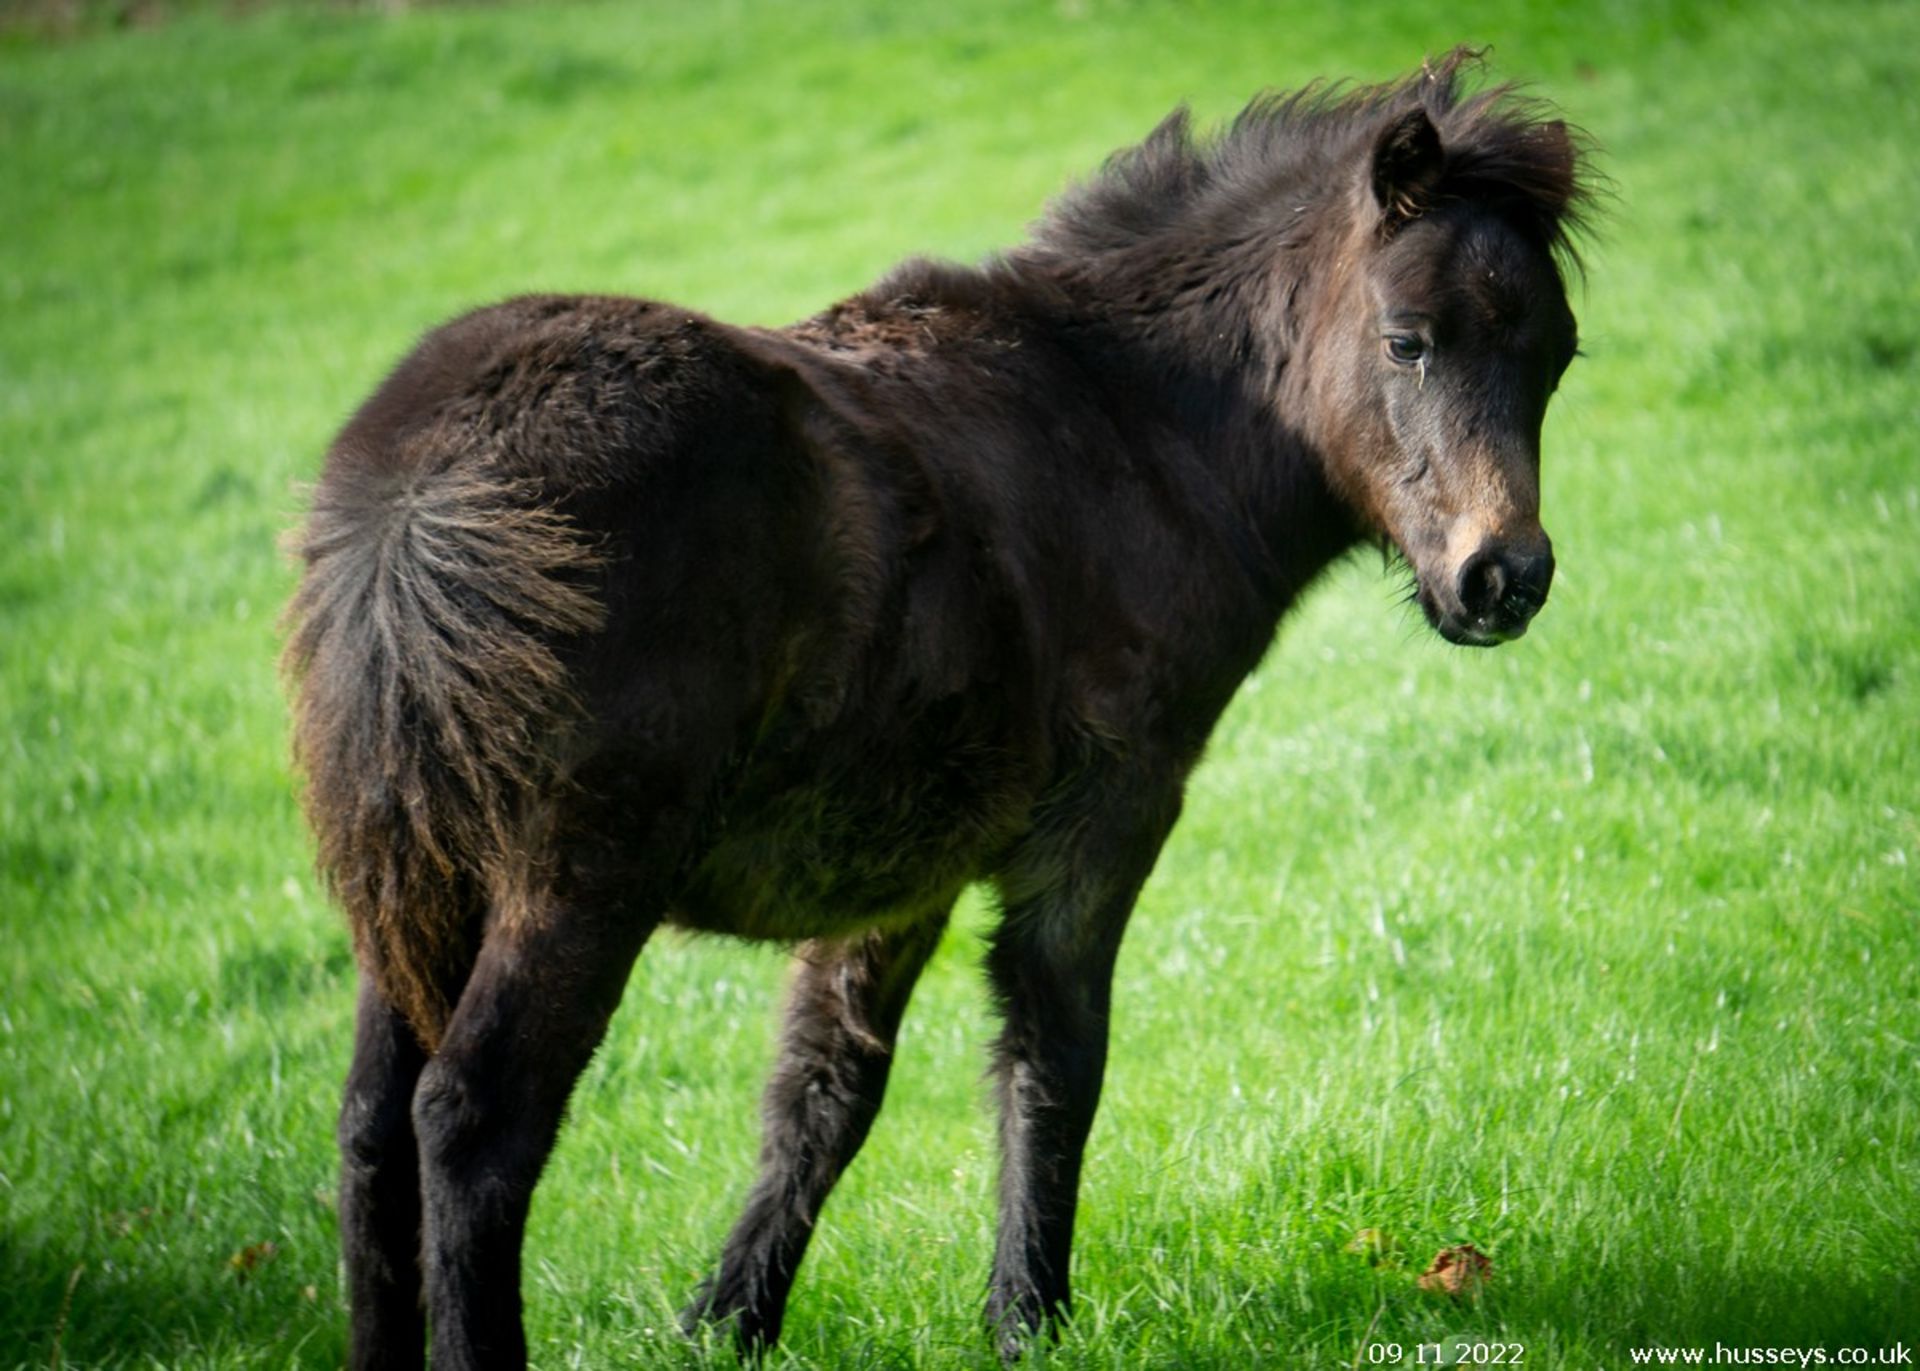 'HOLNE COURT HERBY' DARTMOOR HILL PONY DARK BAY COLT APPROX 6 MONTHS OLD